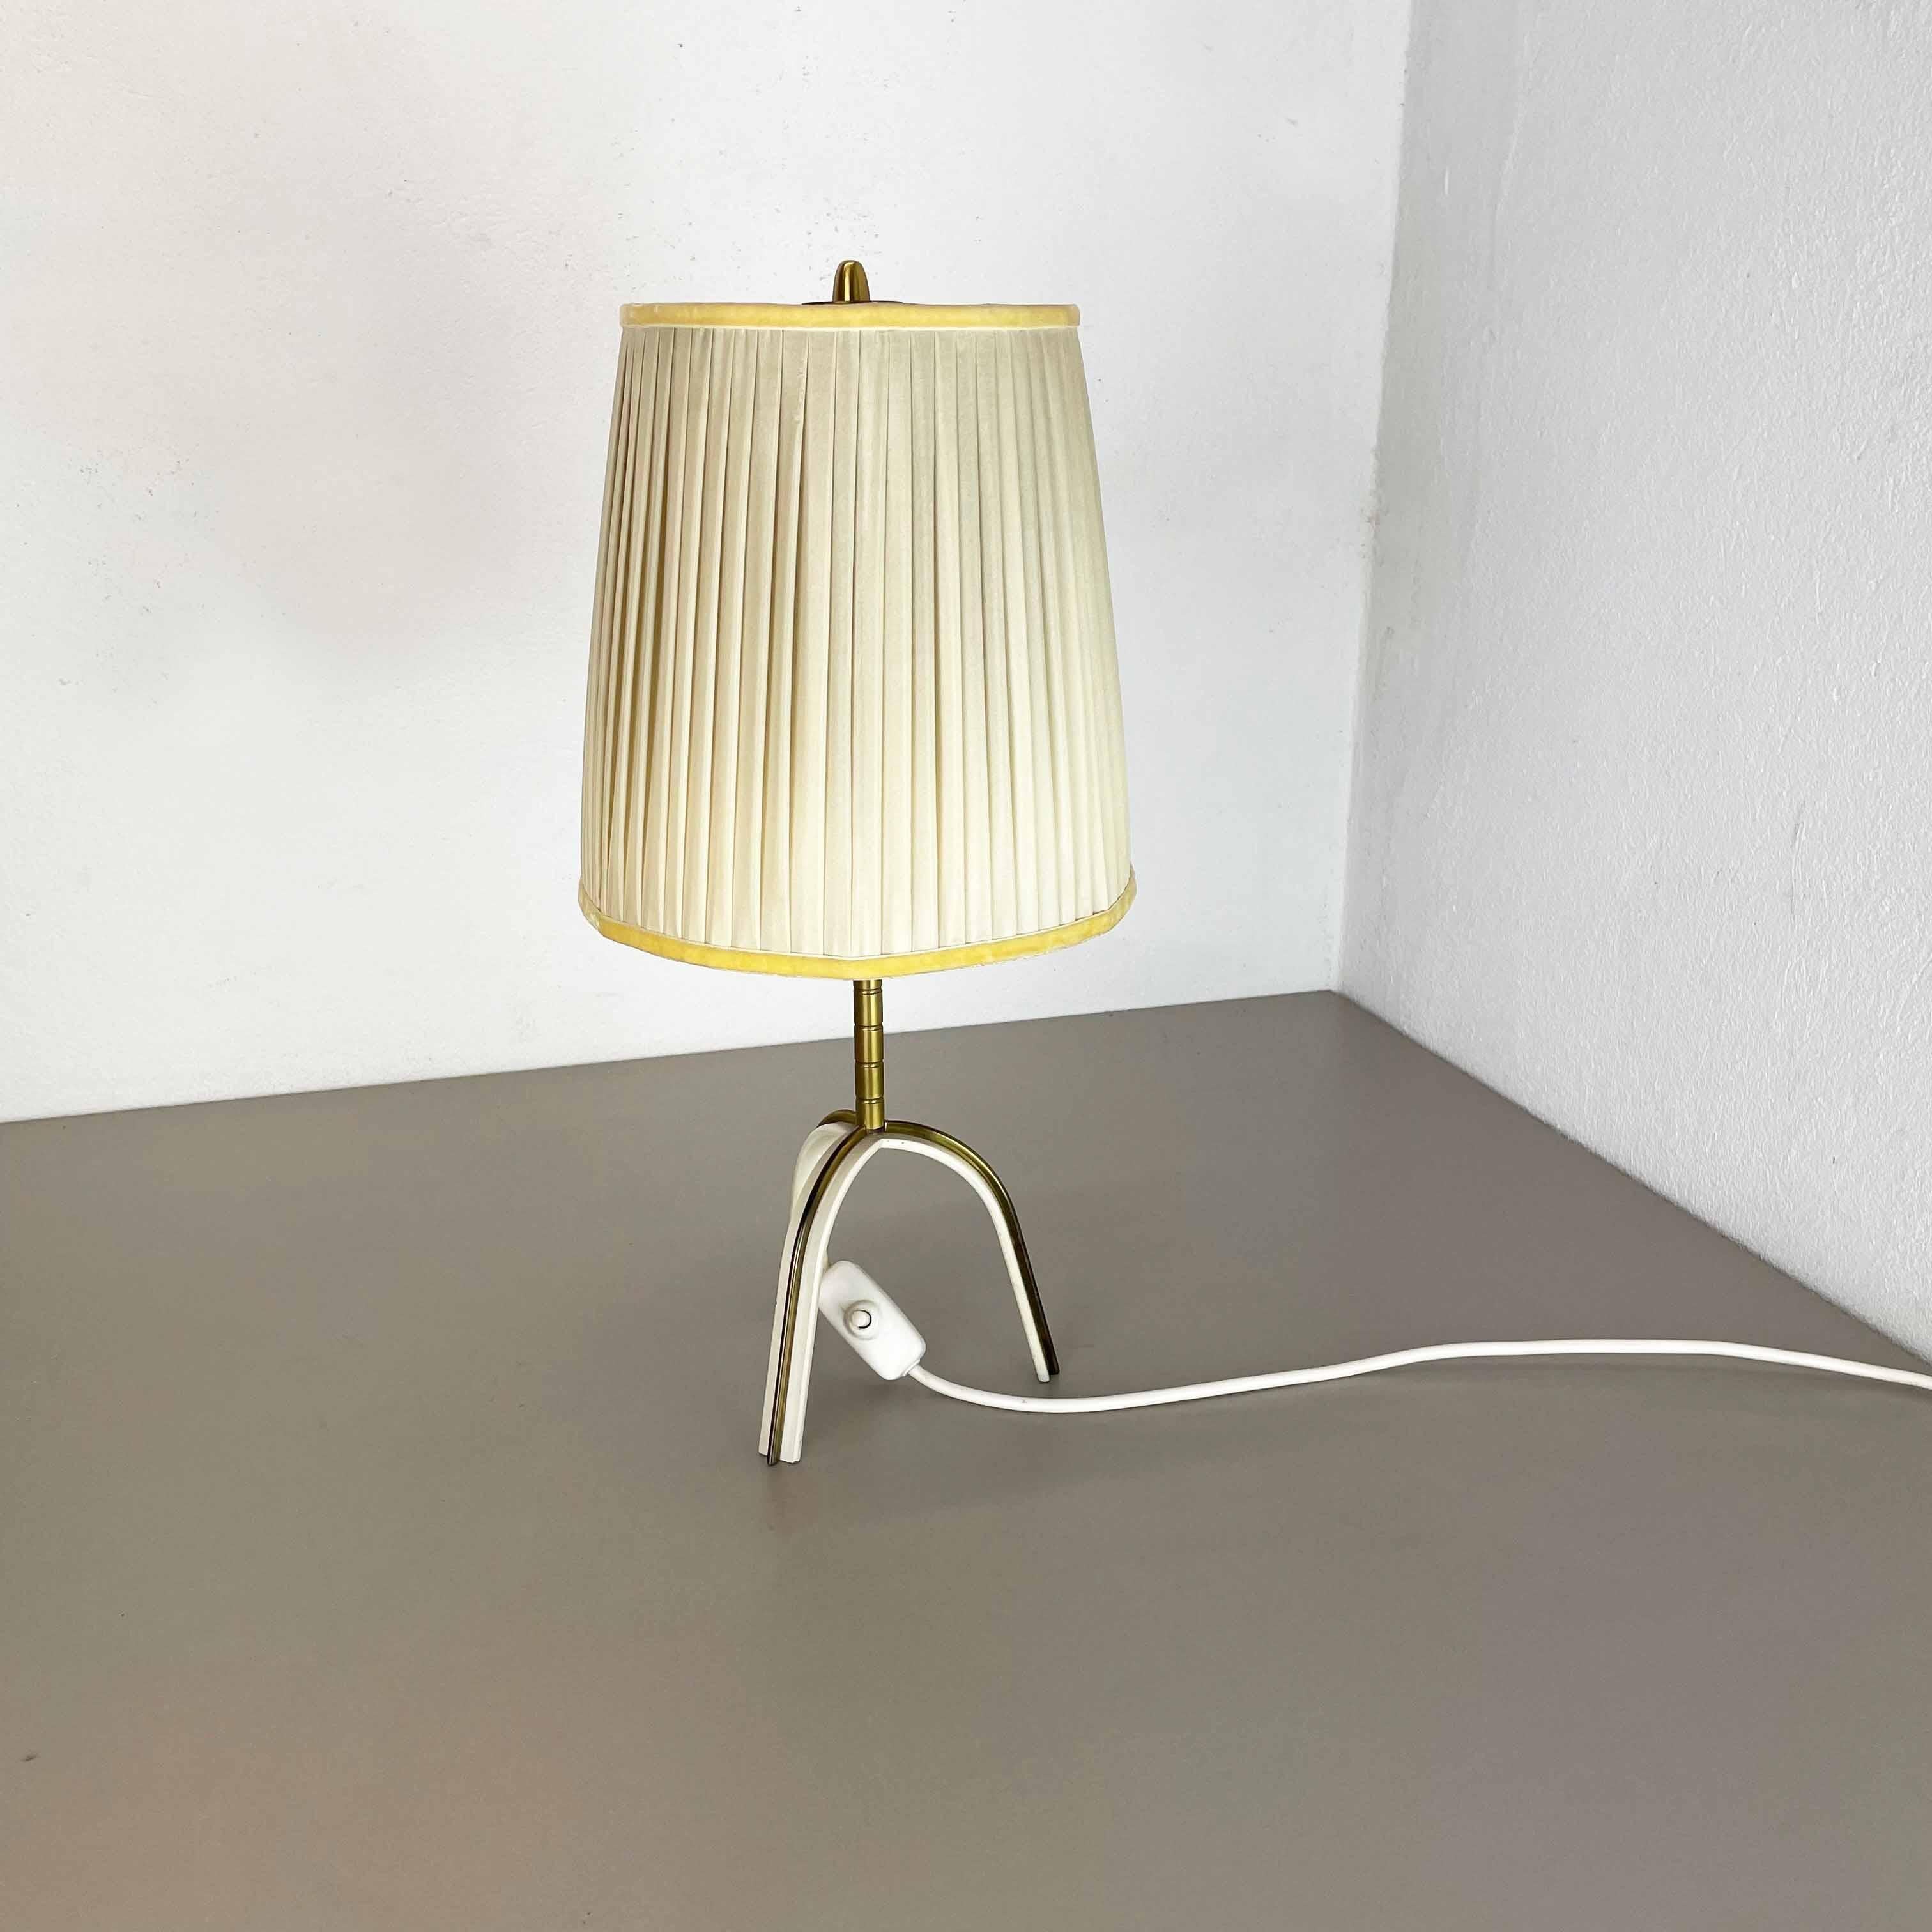 Article:

Tripod table light


Origin:

Austria


Age:

1950s


This original vintage tripod table light was designed and produced in the 1950s in Austria. The super rare and Minimalist tripod Stand element is made of metal and brass.